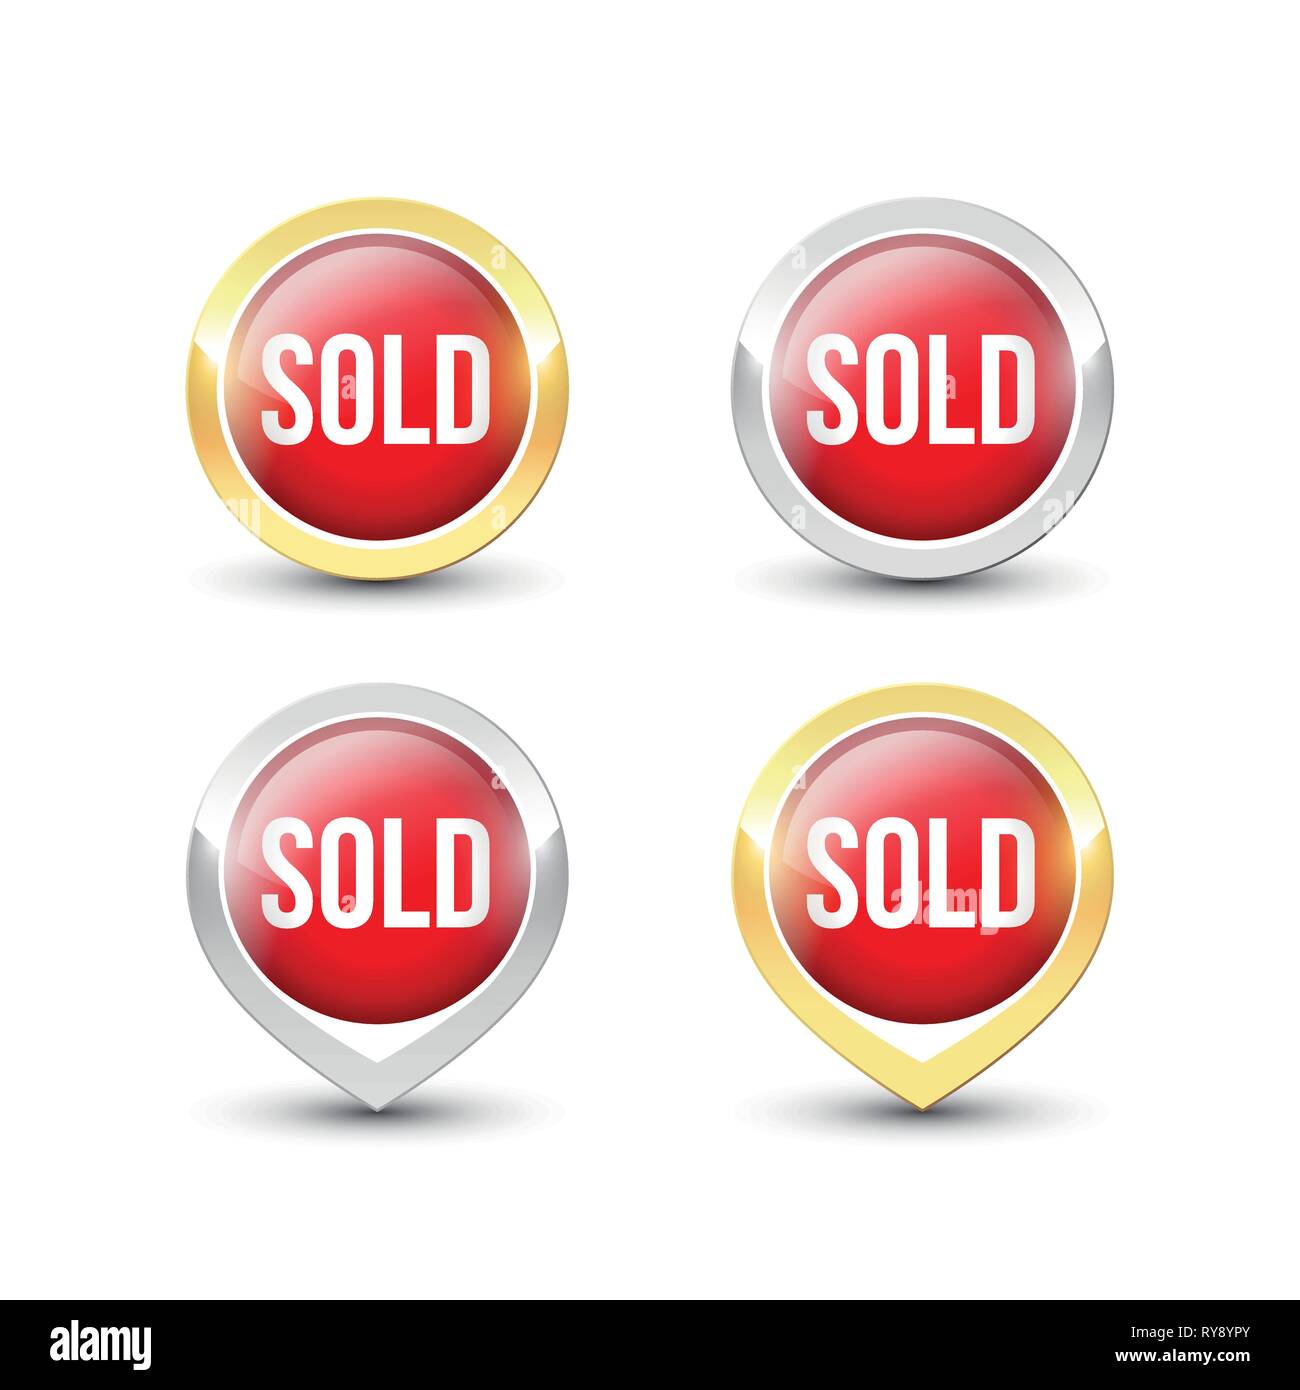 Red round SOLD buttons and pointers with metallic gold and silver border. Vector label icons isolated on white background. Stock Vector